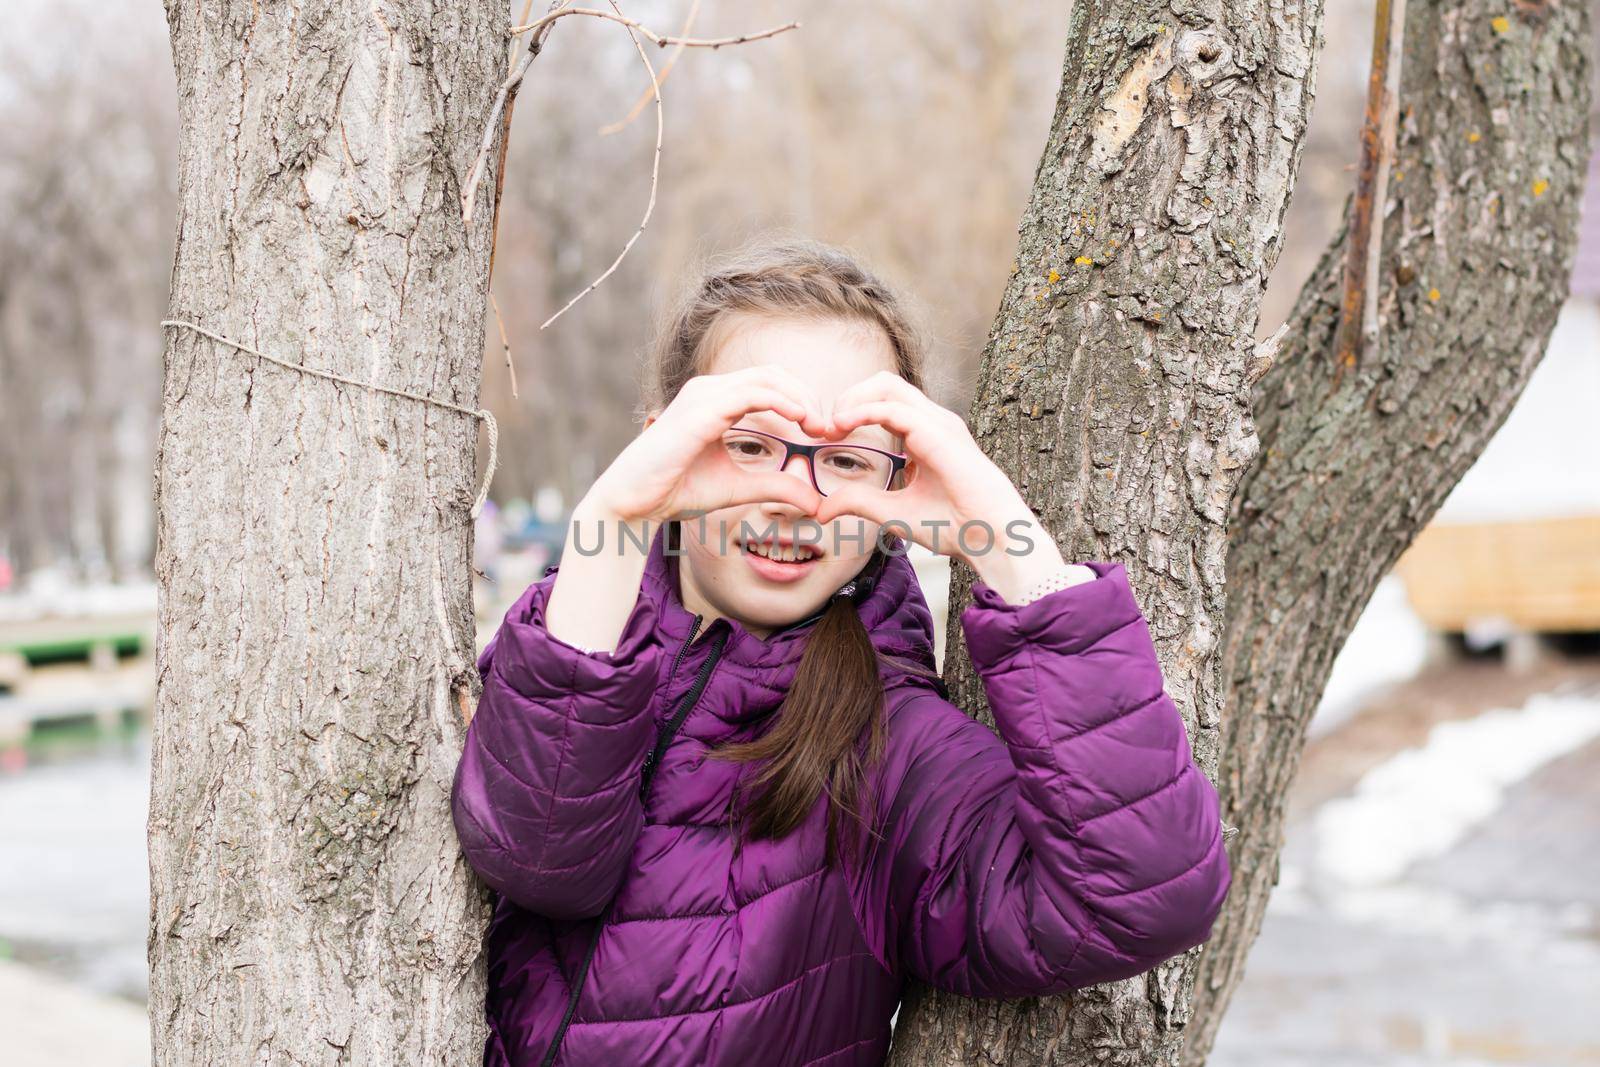 Young attractive girl in glasses makes a heart shape with her palms in front of her face in a city park in early spring by Aleruana